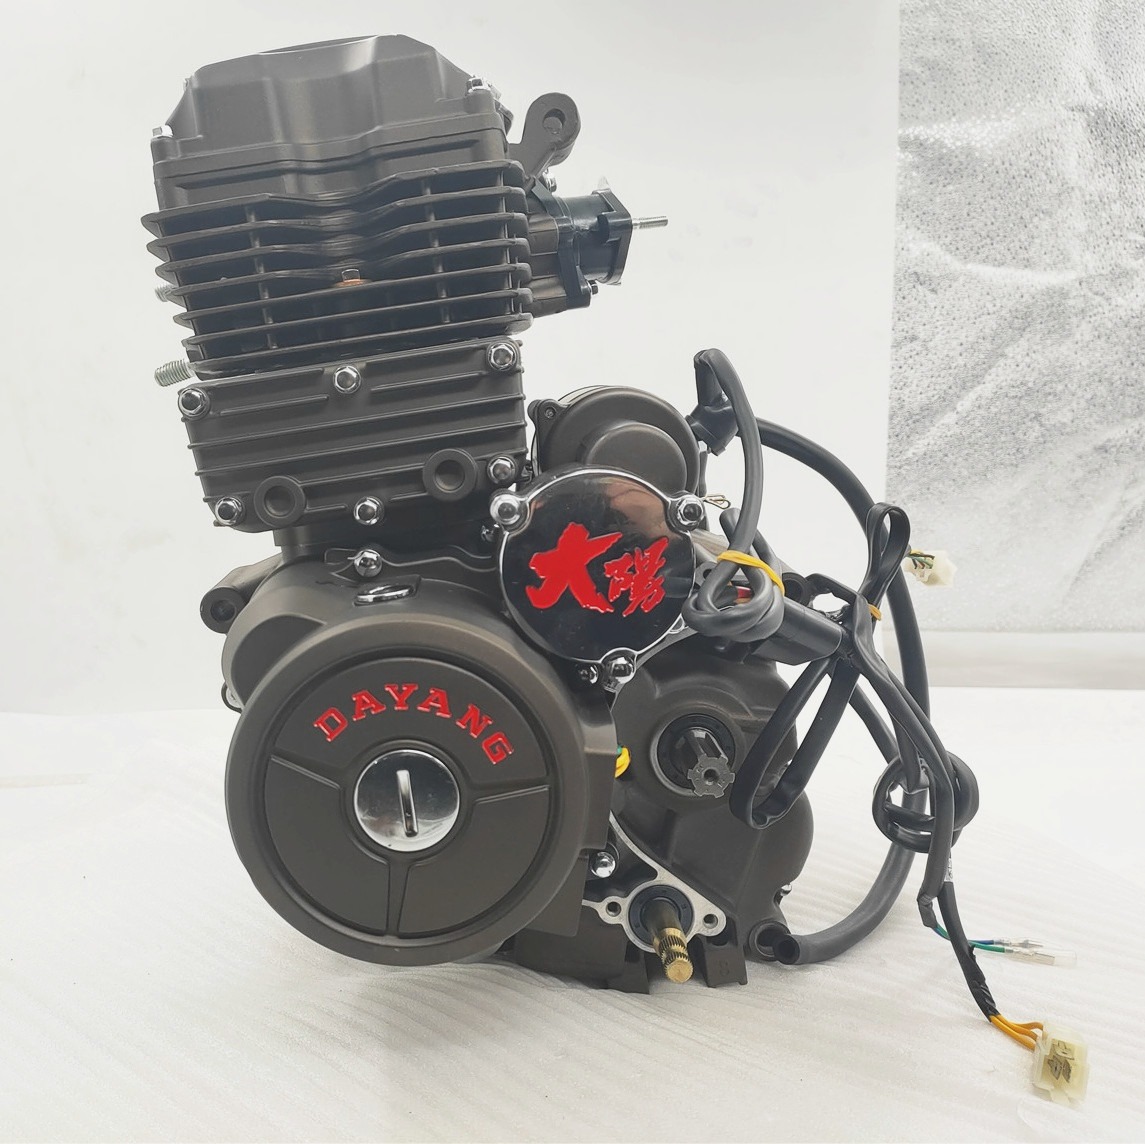 LIFAN CG cool 200cc DAYANG Motorcycle Engine Assembly Single Cylinder Four Stroke Style China  Origin Quality CCC